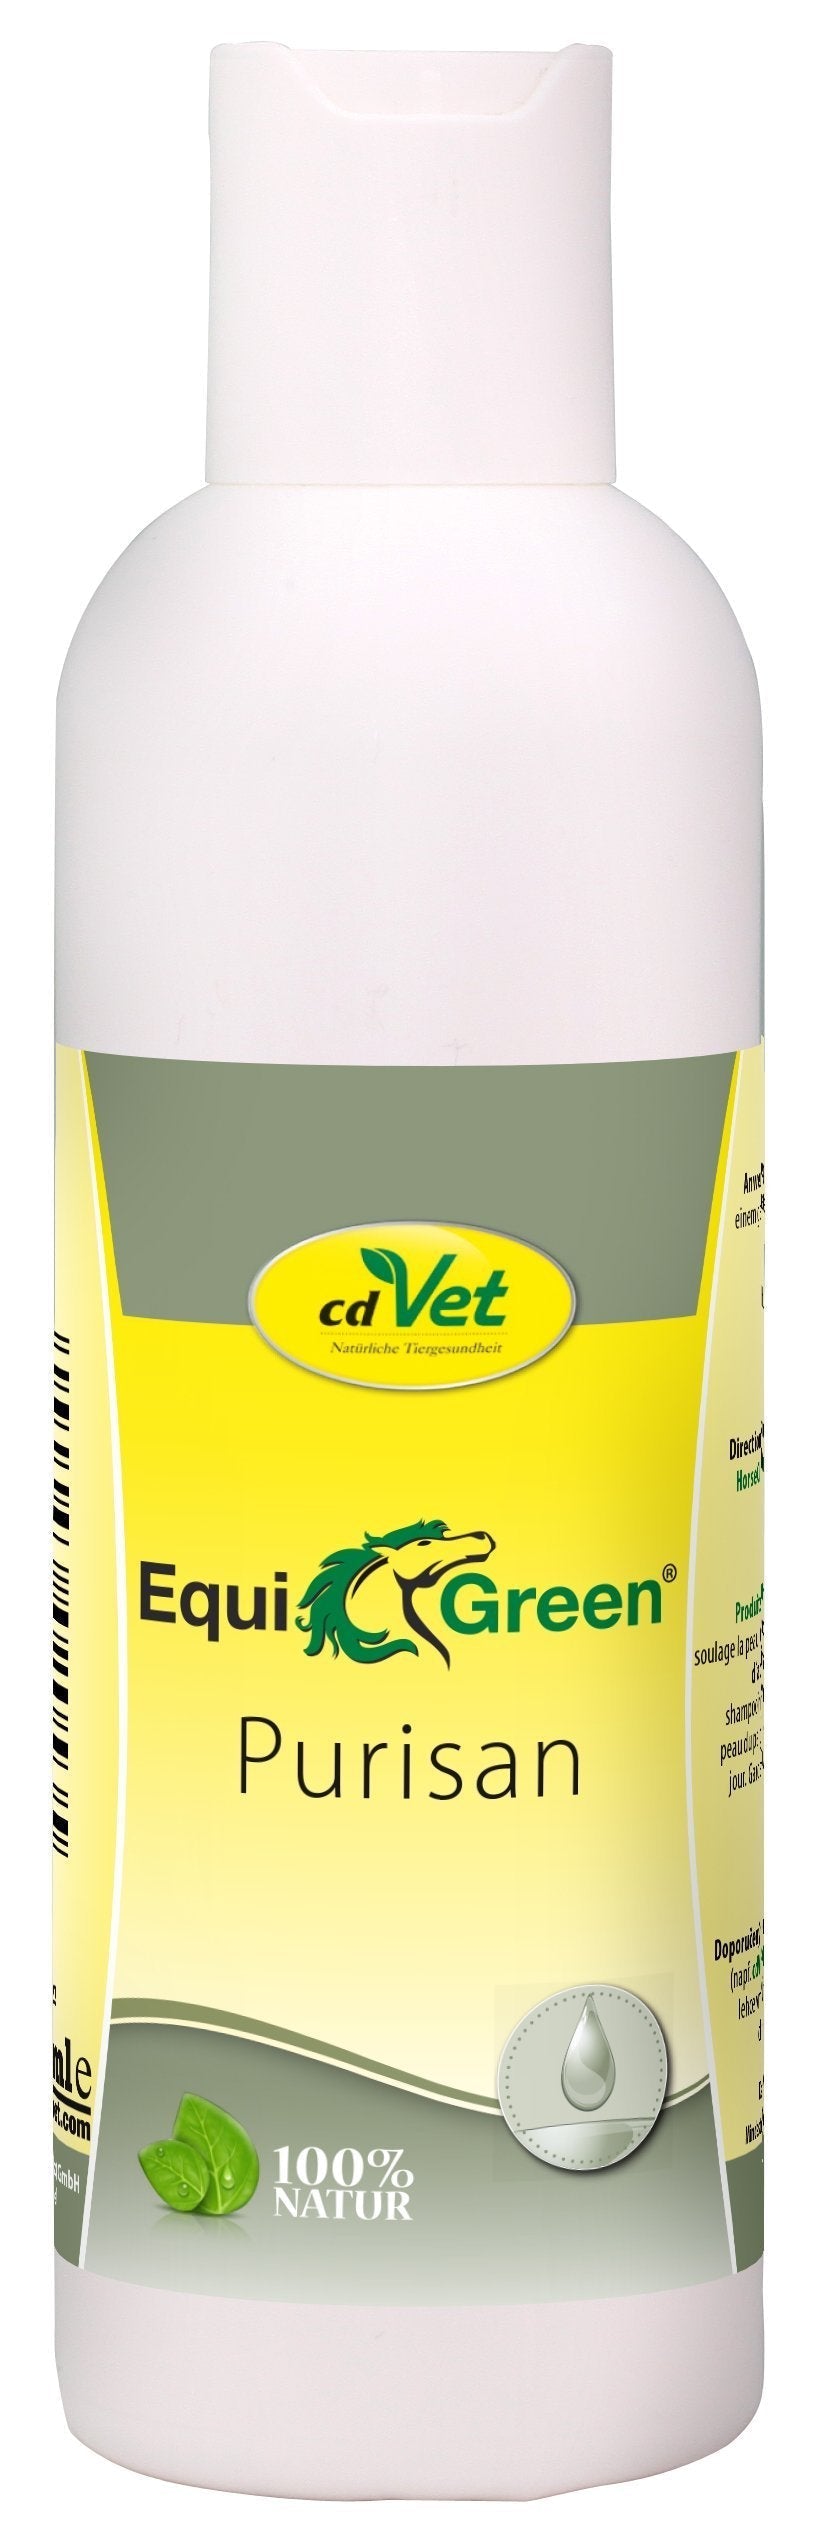 cdVet Naturprodukte EquiGreen Purisan 200 ml - Horse - care product - mane + tail area - relaxing + soothing - cleansing - itching - well-being - essential oils - natural - - PawsPlanet Australia